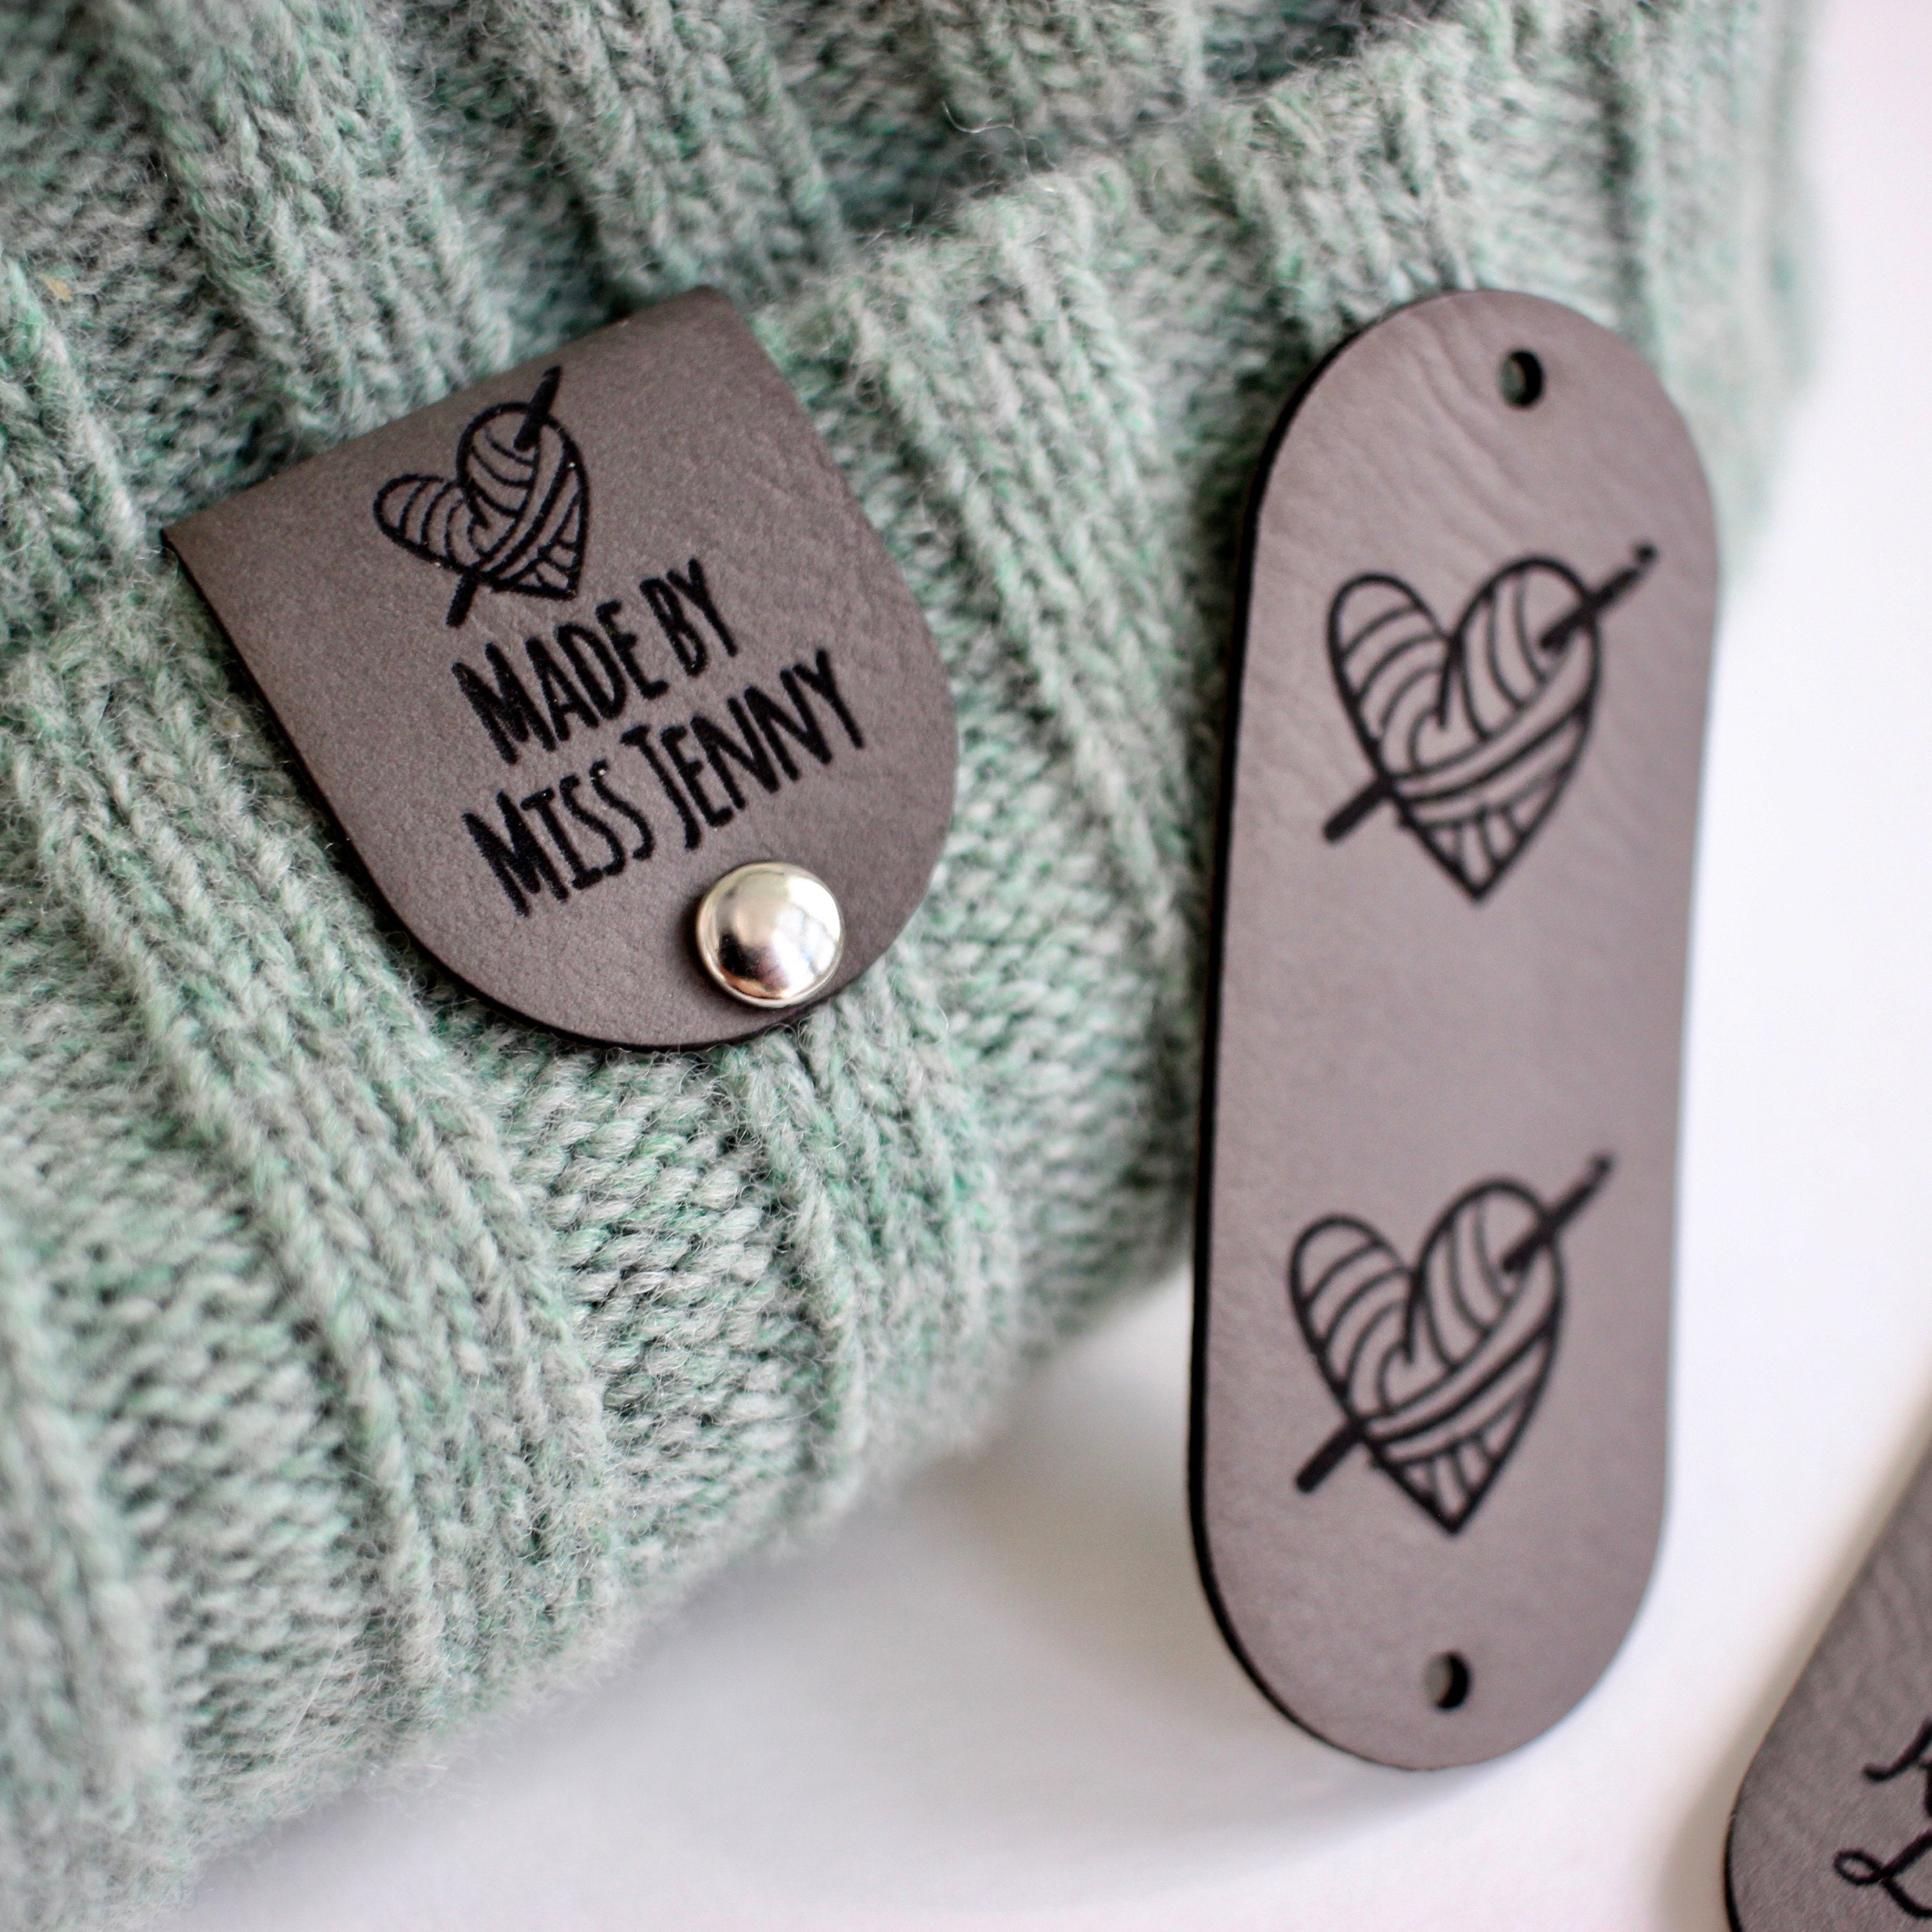 Personalized Faux Leather Tags for Knitted, Handmade or Crochet